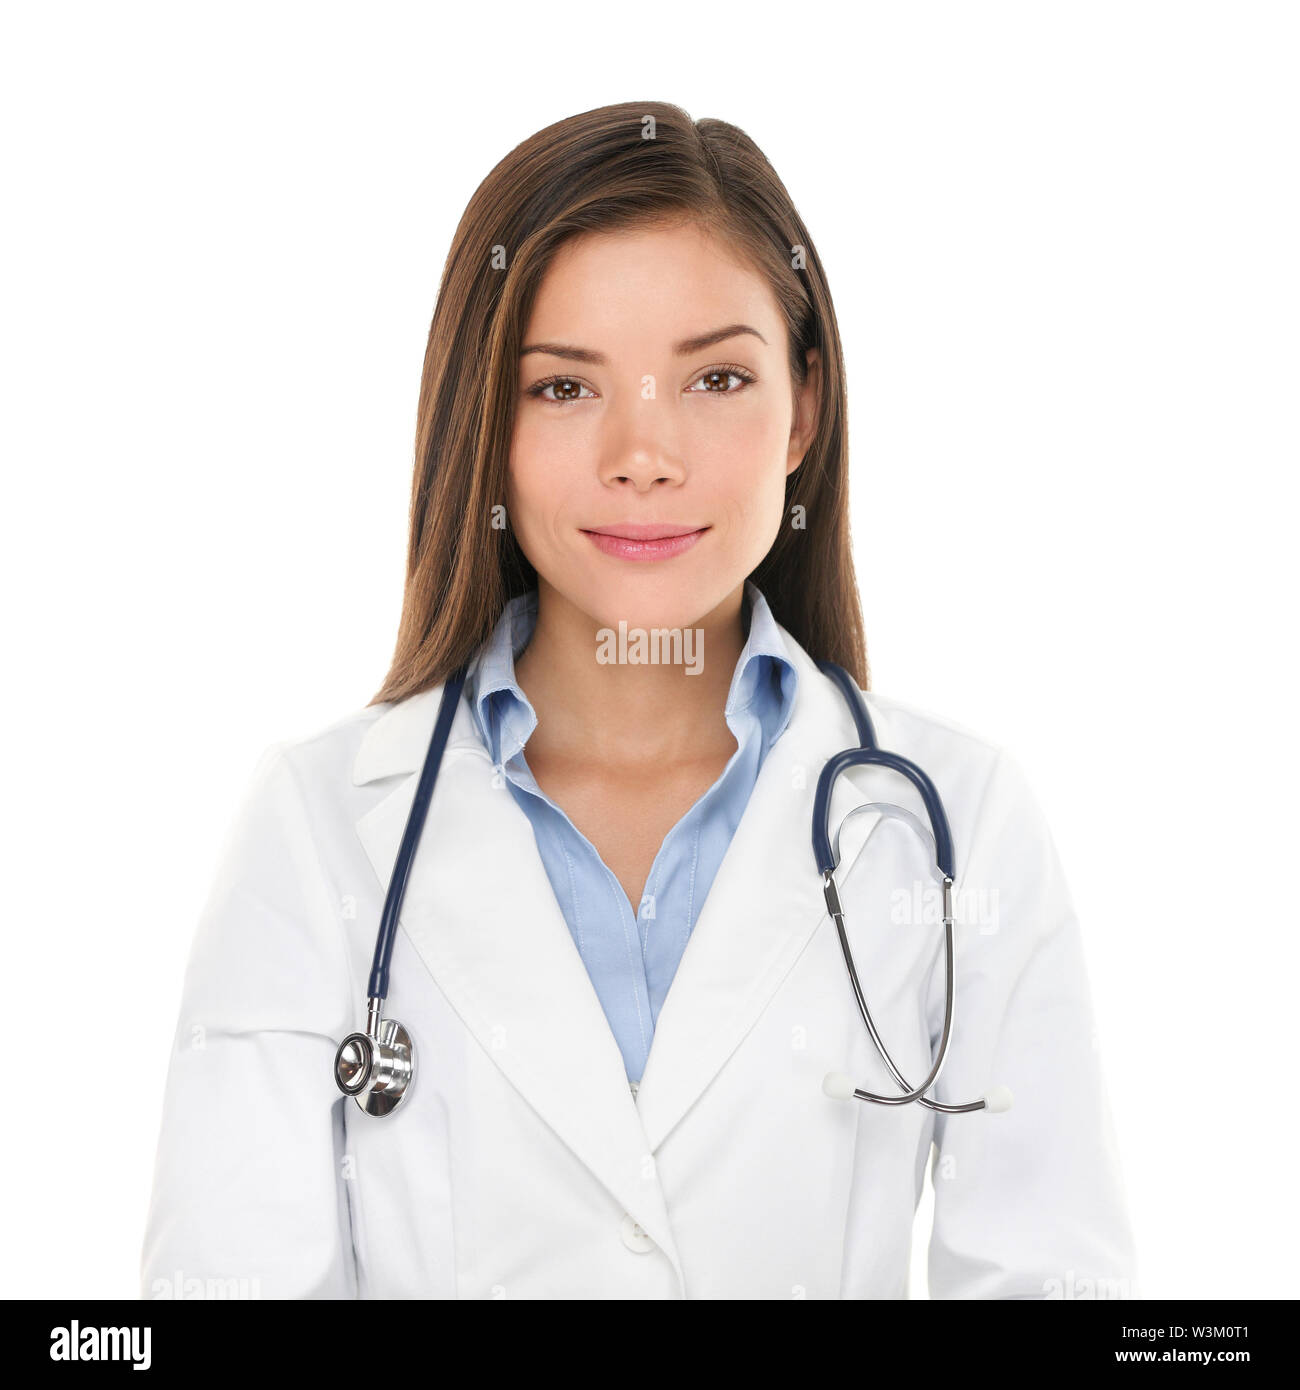 Medical people: Young asian doctor woman. Female medical doctor smiling portrait. Multiracial Asian / Caucasian woman medical professional isolated on white background. Stock Photo